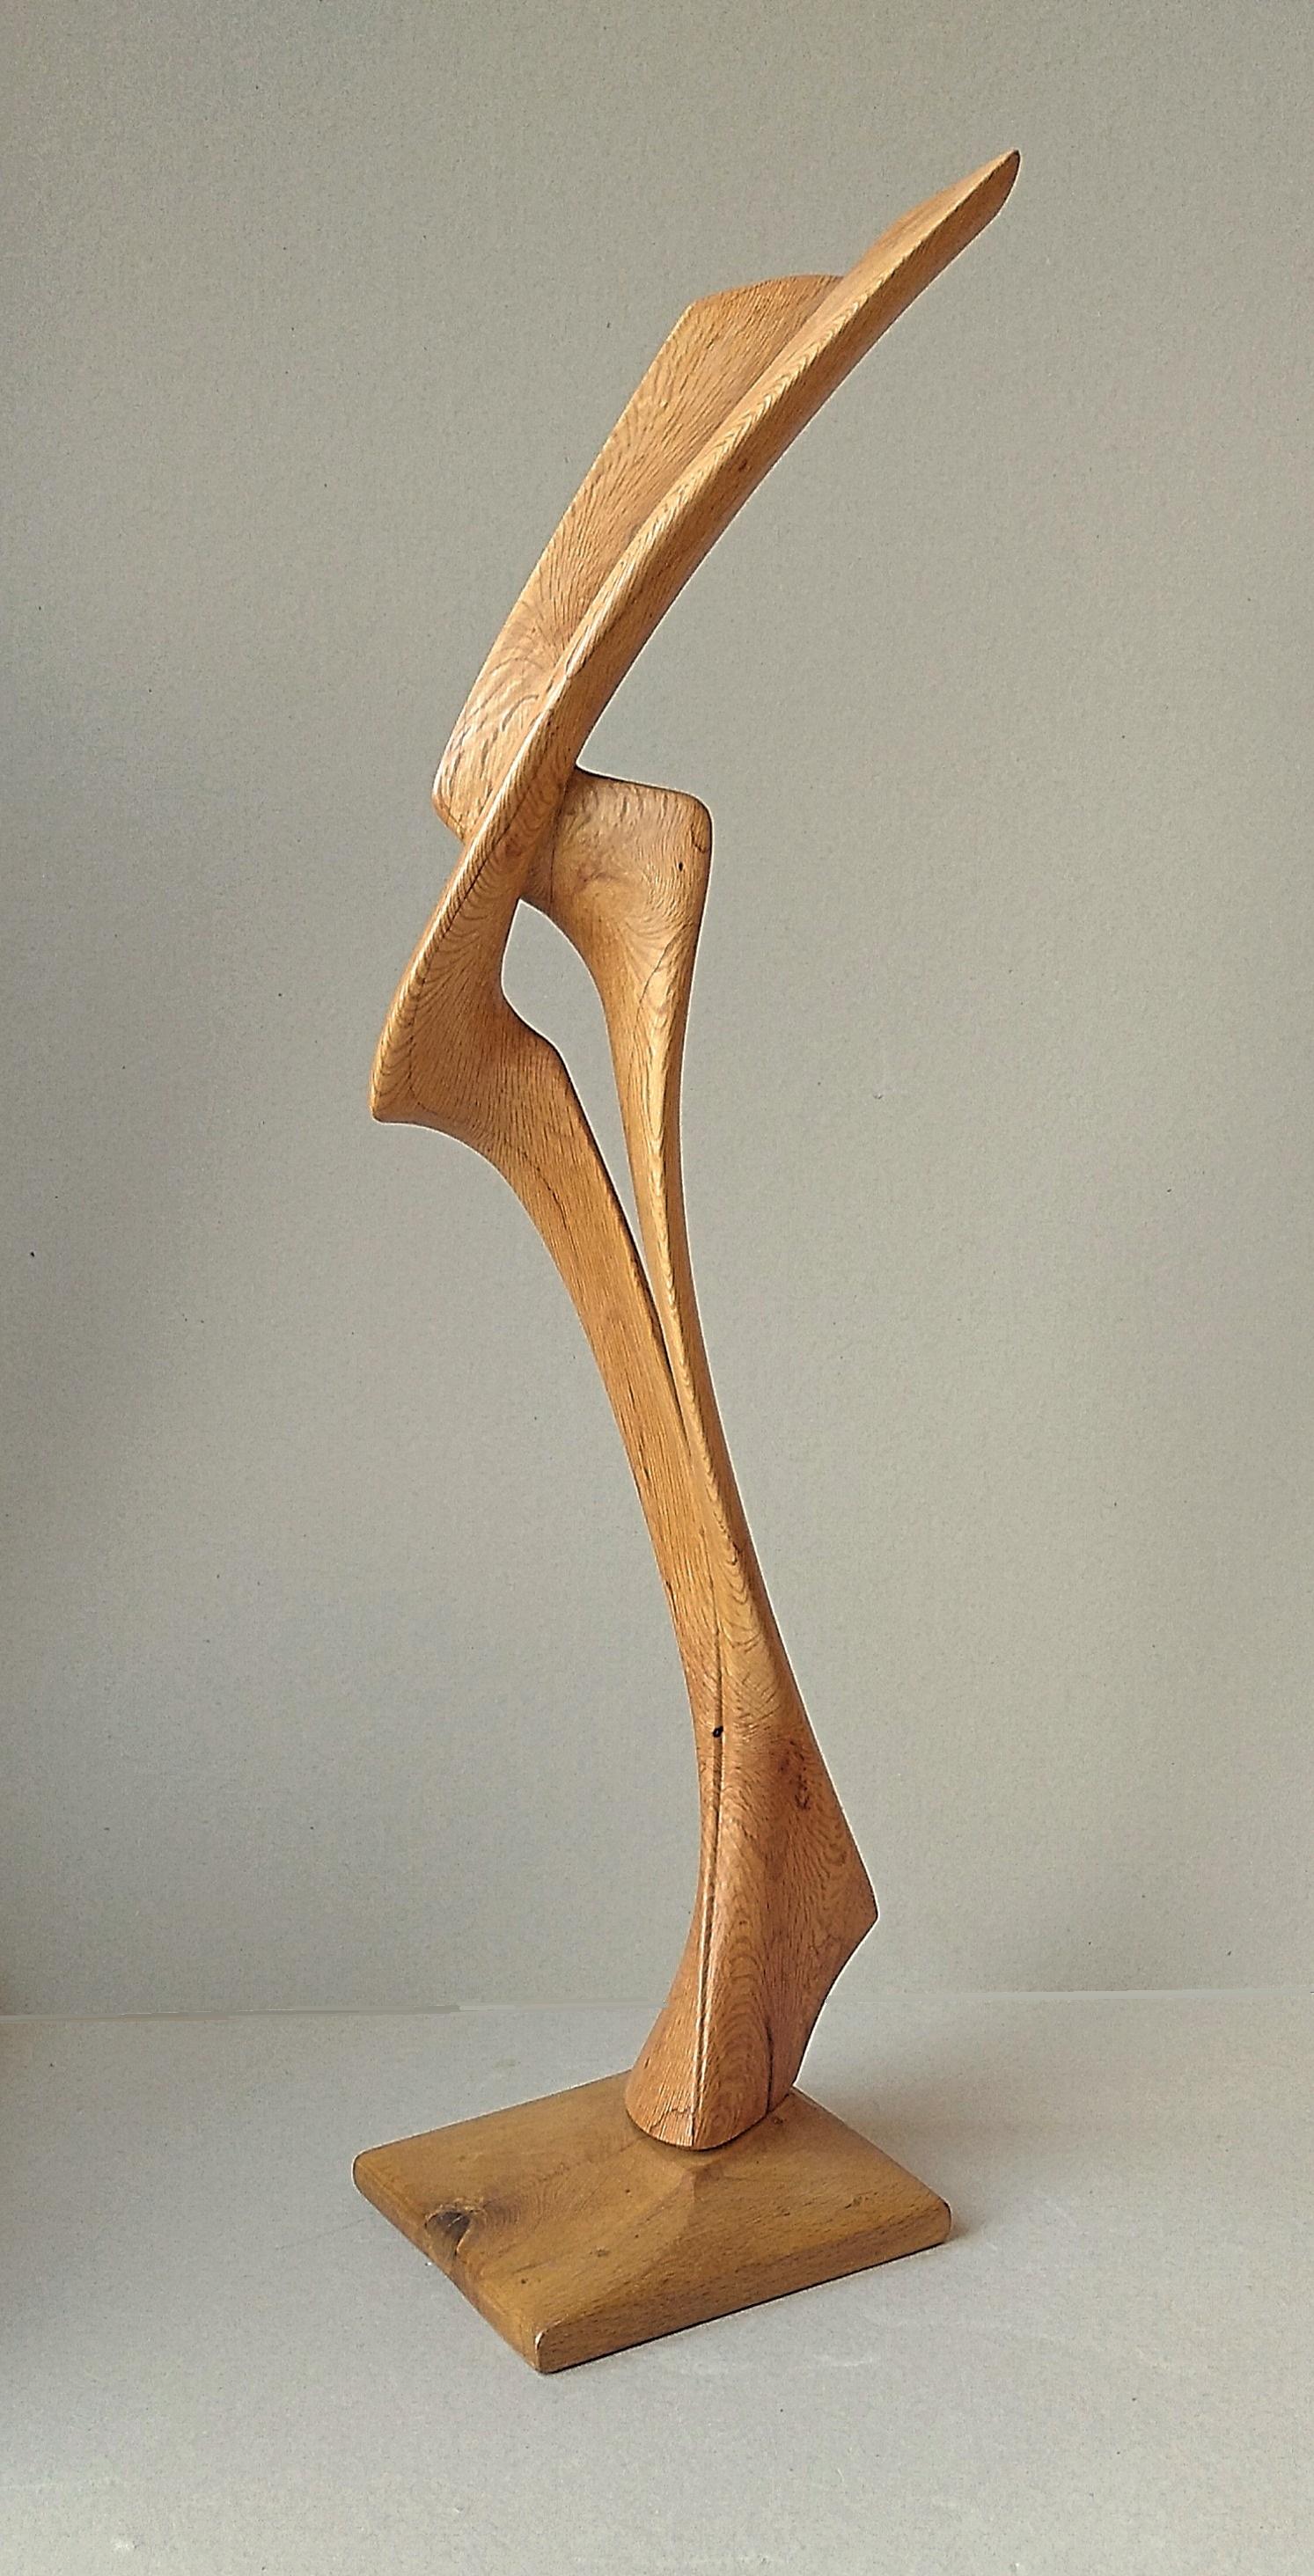 Very pure in its lines from every angle, this abstract oak wood sculpture is an unique artwork by Lutfi Romhein.

A graduate from the Academy of Fine Arts of Carrare, in Italy, Lutfi Romhein is a sculptor of Syrian origin, living in France since the